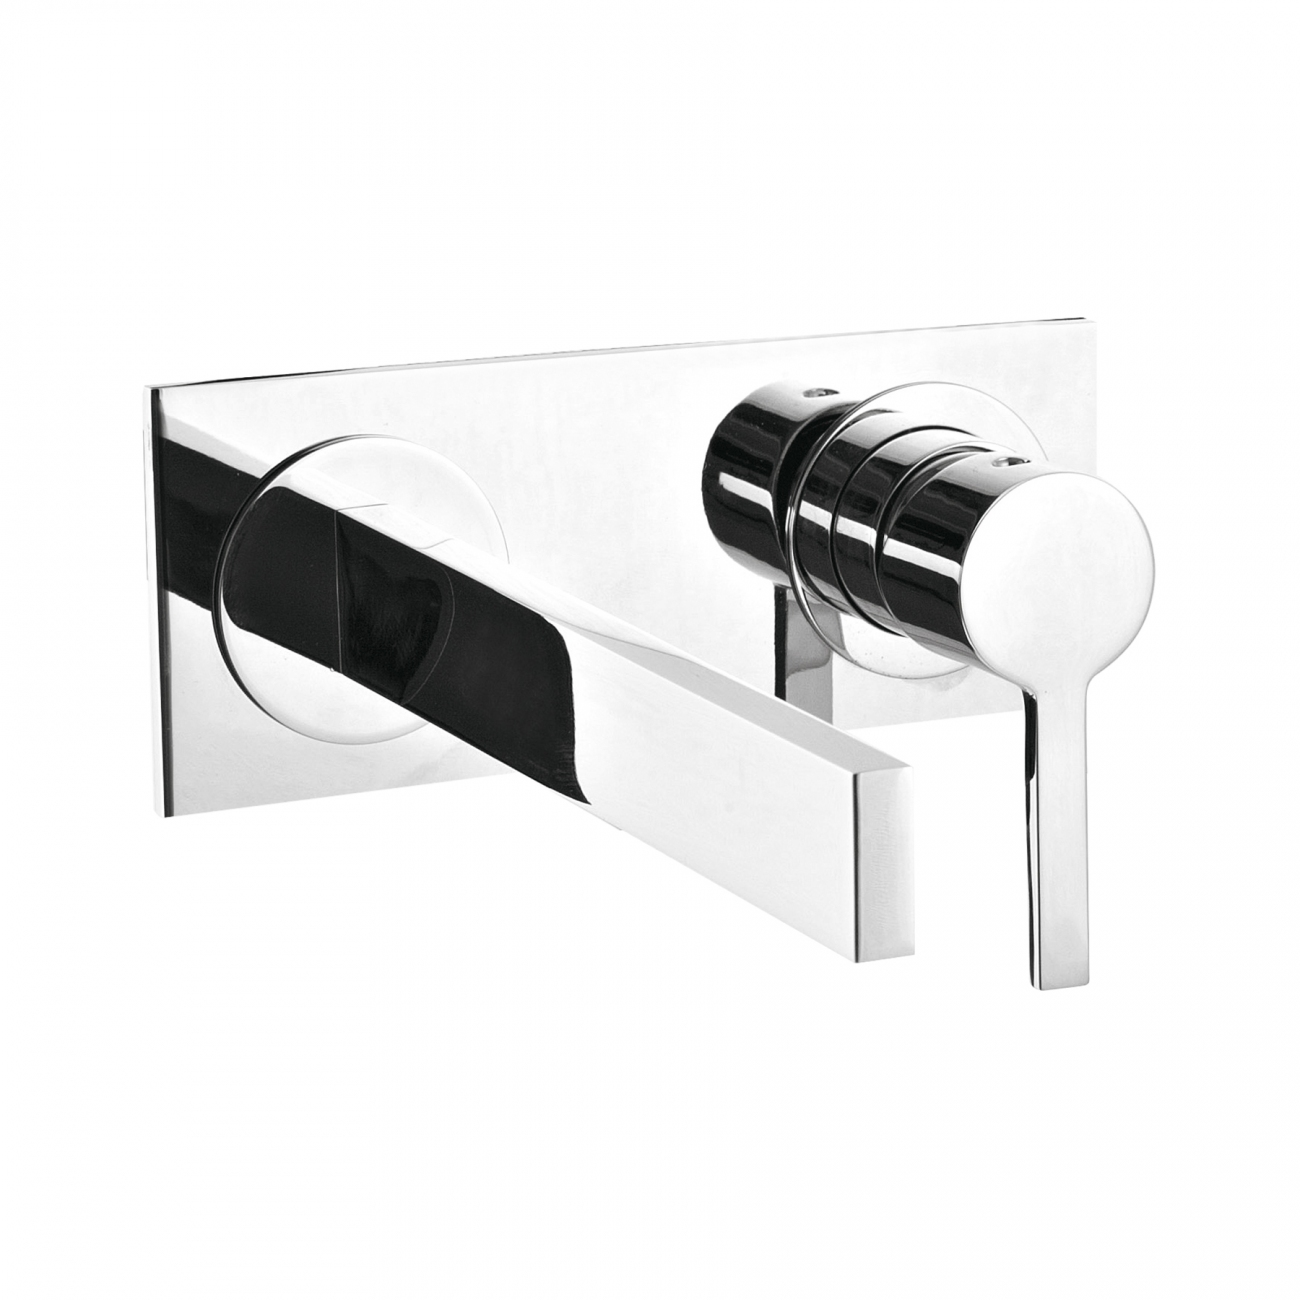 Treemme Time Out wall-mounted washbasin mixer